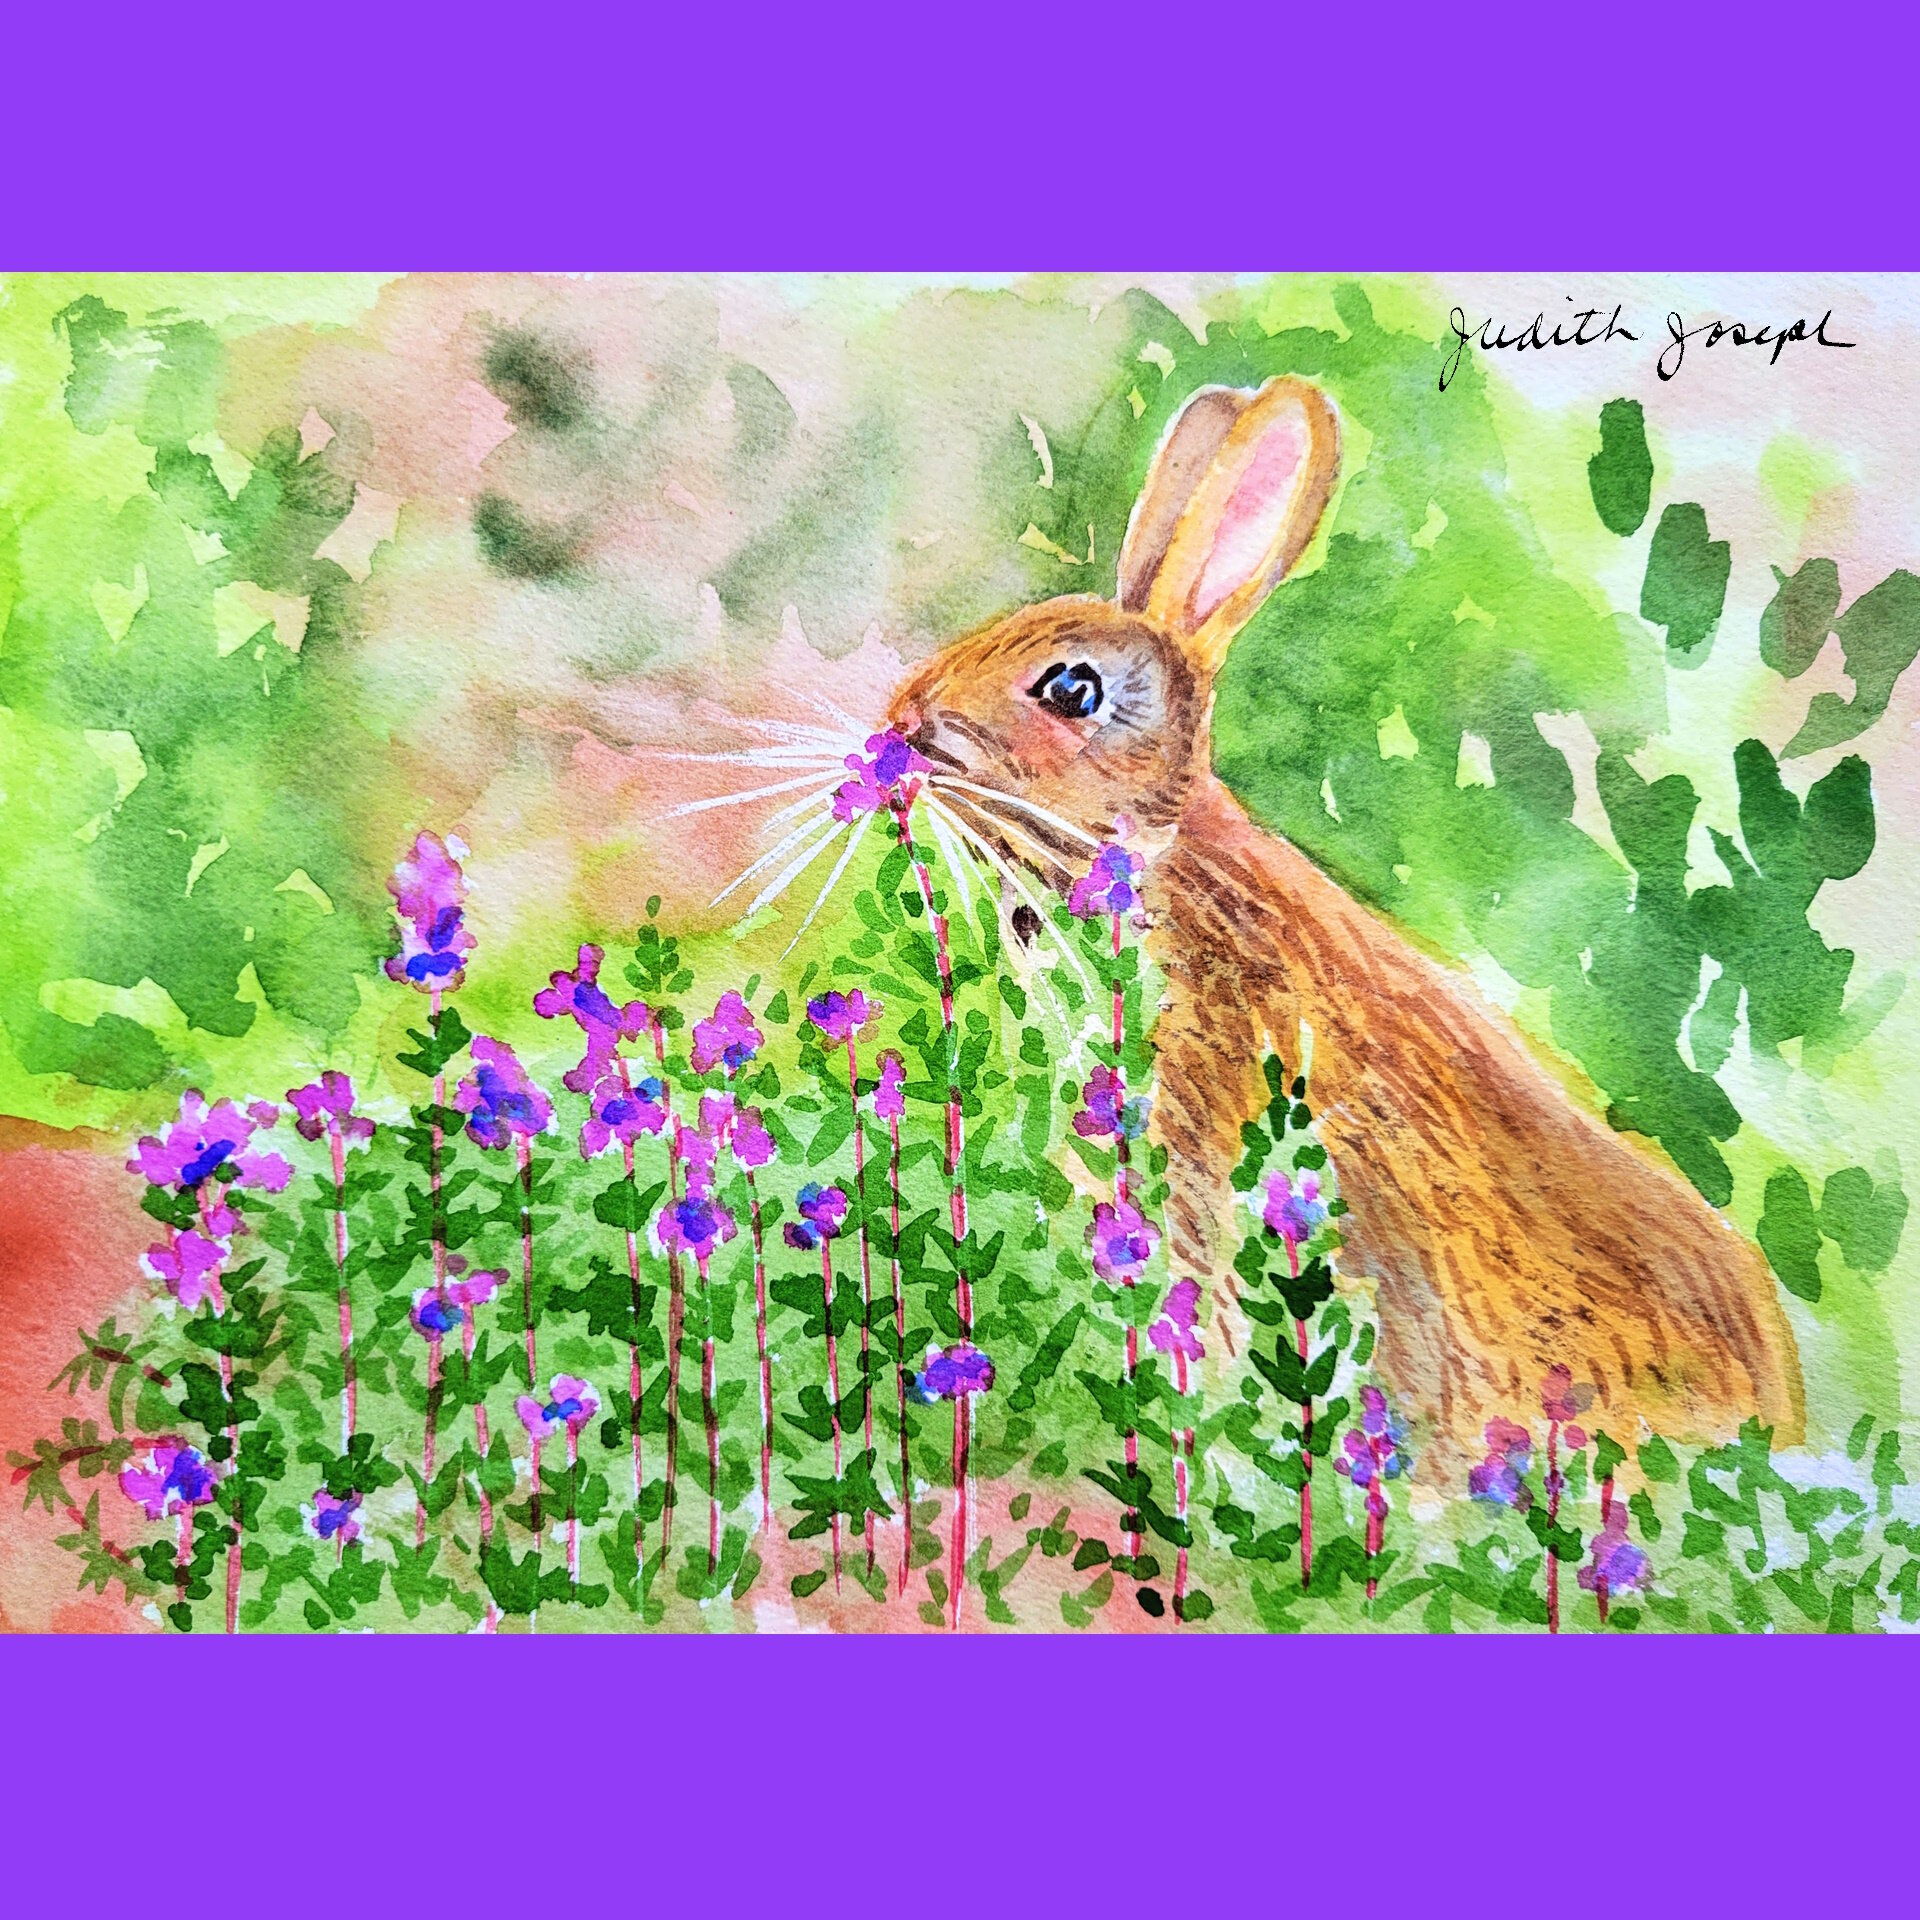 Happy Easter to all who celebrate! #watercolor  #easterbunny  #watercolorinstruction #happyeaster